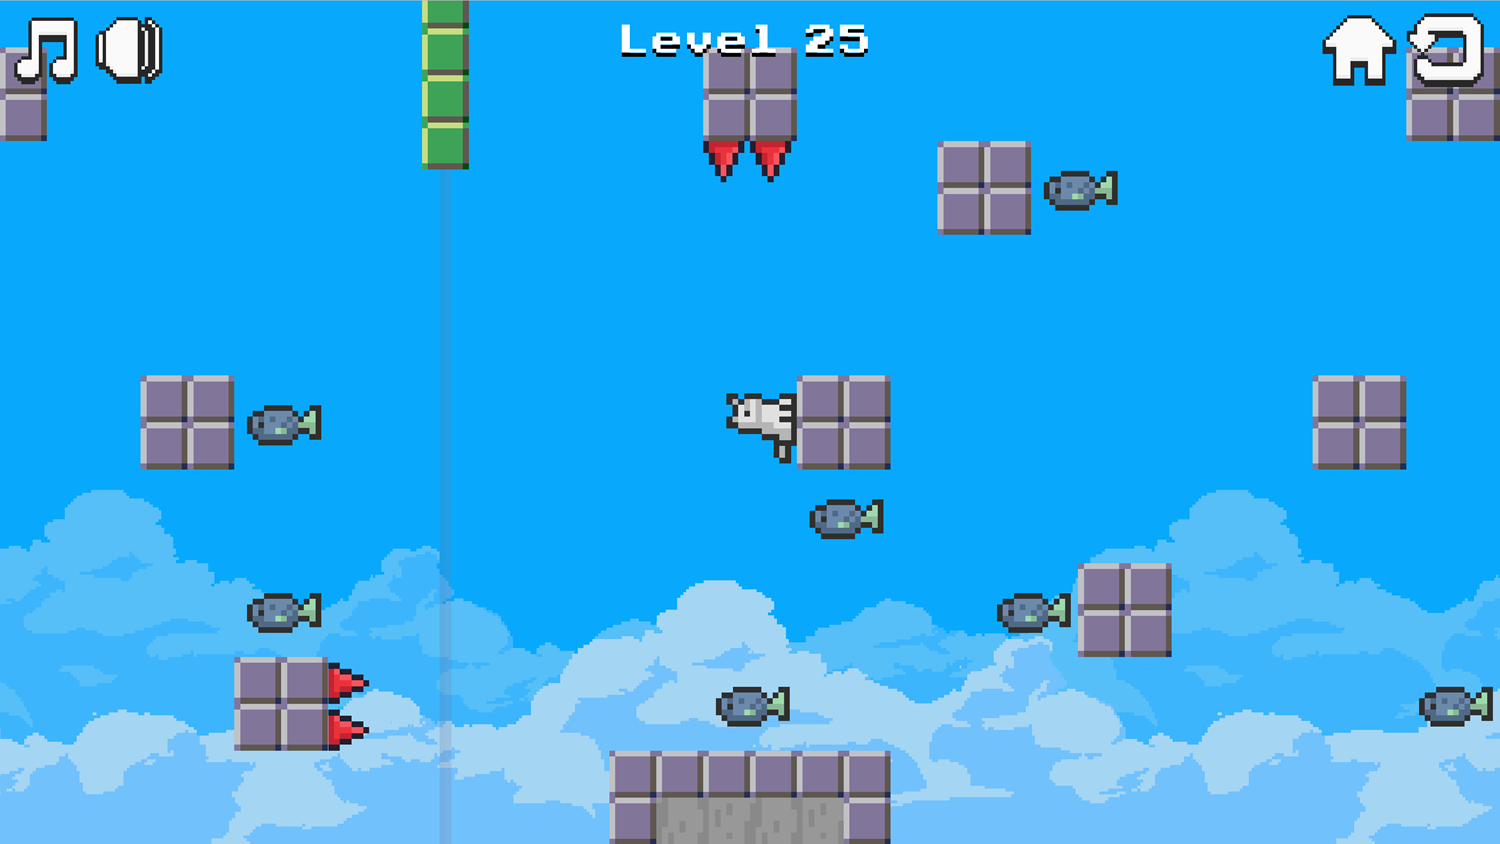 Paws and Claws Game Final Level Screenshot.